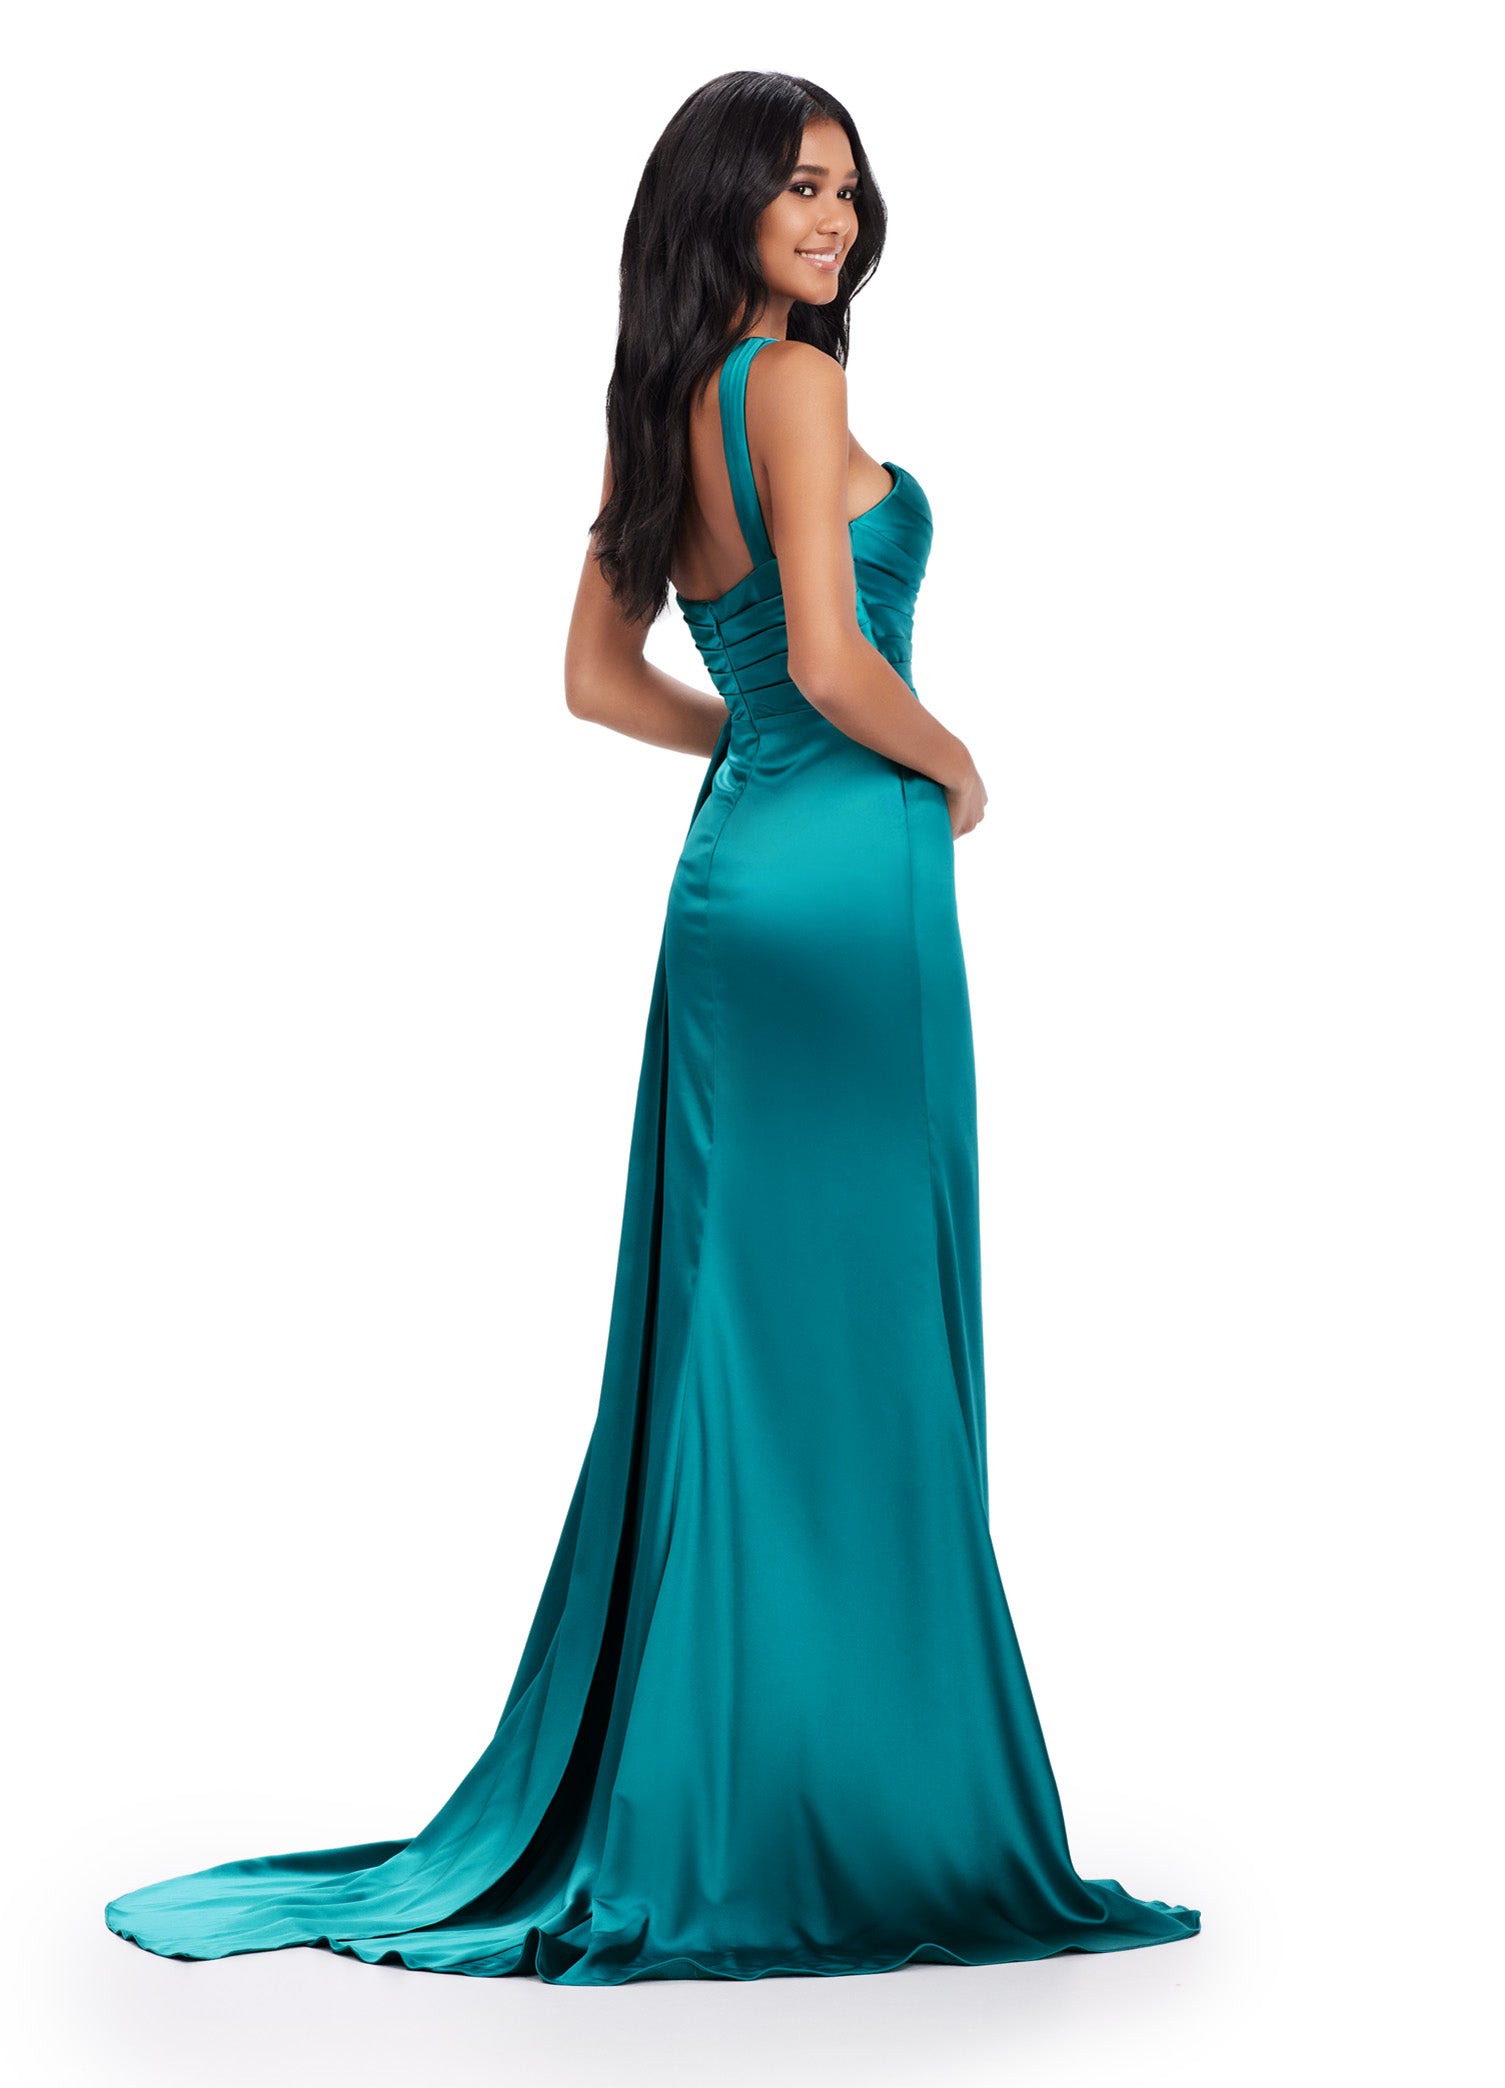 Effortlessly elegant, the Ashley Lauren 11576 Long Prom Dress is perfect for any formal occasion. The one shoulder design with ruched satin creates a sleek and sophisticated silhouette, while the slit adds a touch of glamour. Stand out in this pageant-worthy gown. Ashley Lauren Long Prom Dress One Shoulder Ruched Satin Gown Slit Formal Pageant Gown